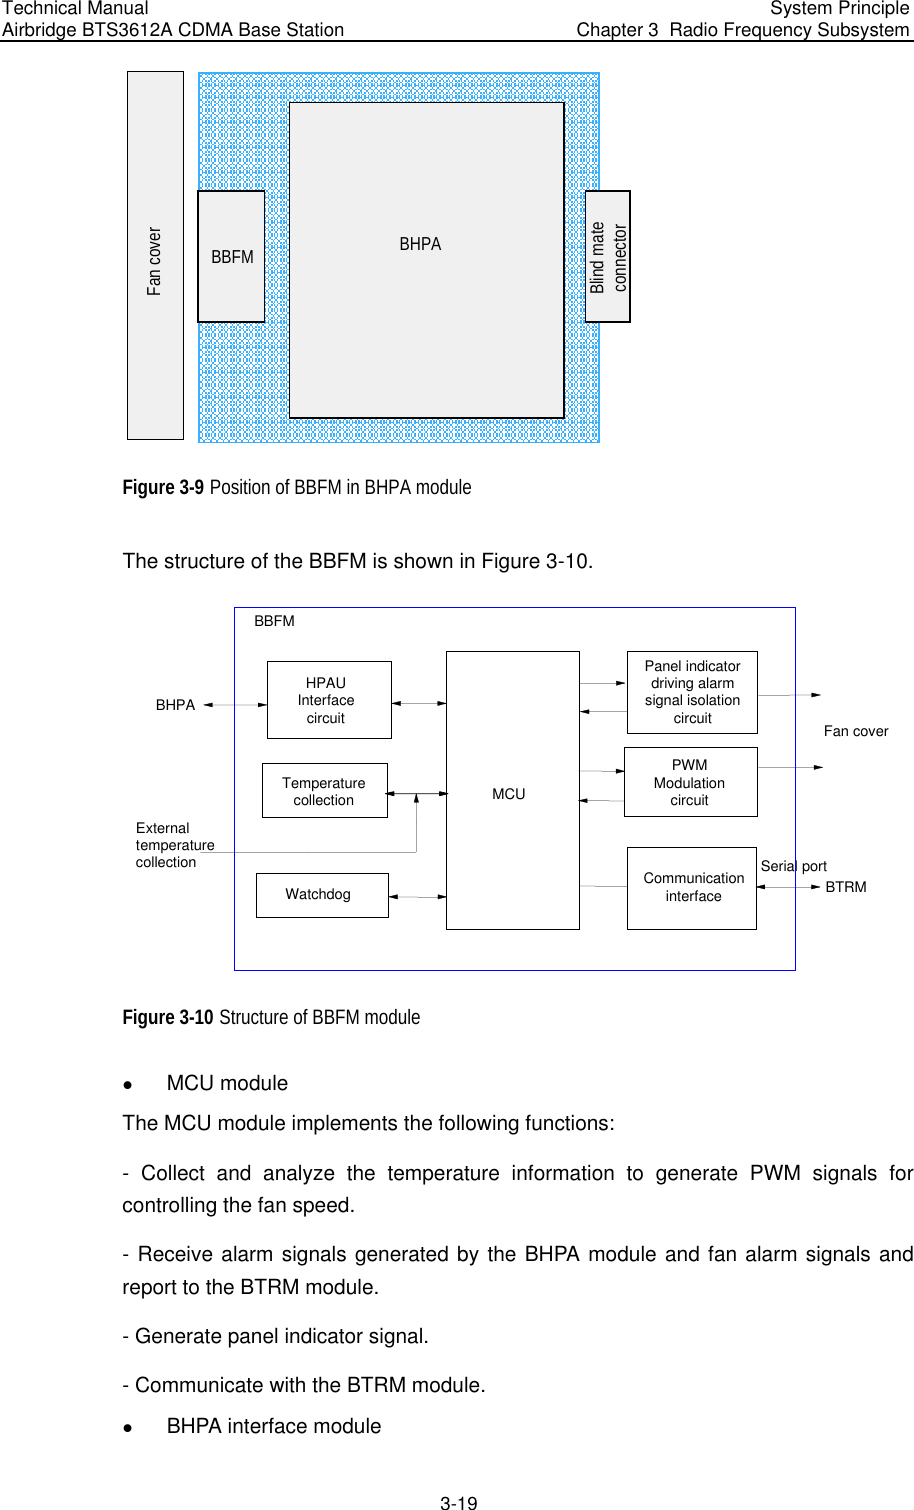 Technical Manual  Airbridge BTS3612A CDMA Base Station  System Principle Chapter 3  Radio Frequency Subsystem  3-19 Fan coverBHPABBFMBlind mateconnector Figure 3-9 Position of BBFM in BHPA module The structure of the BBFM is shown in Figure 3-10.  MCUCommunicationinterfaceWatchdogHPAUInterfacecircuitPWMModulationcircuitPanel indicatordriving alarmsignal isolationcircuitTemperaturecollection Serial portBBFMBHPAExternaltemperaturecollectionFan coverBTRM Figure 3-10 Structure of BBFM module z MCU module The MCU module implements the following functions:  - Collect and analyze the temperature information to generate PWM signals for controlling the fan speed.  - Receive alarm signals generated by the BHPA module and fan alarm signals and report to the BTRM module.  - Generate panel indicator signal. - Communicate with the BTRM module.  z BHPA interface module 